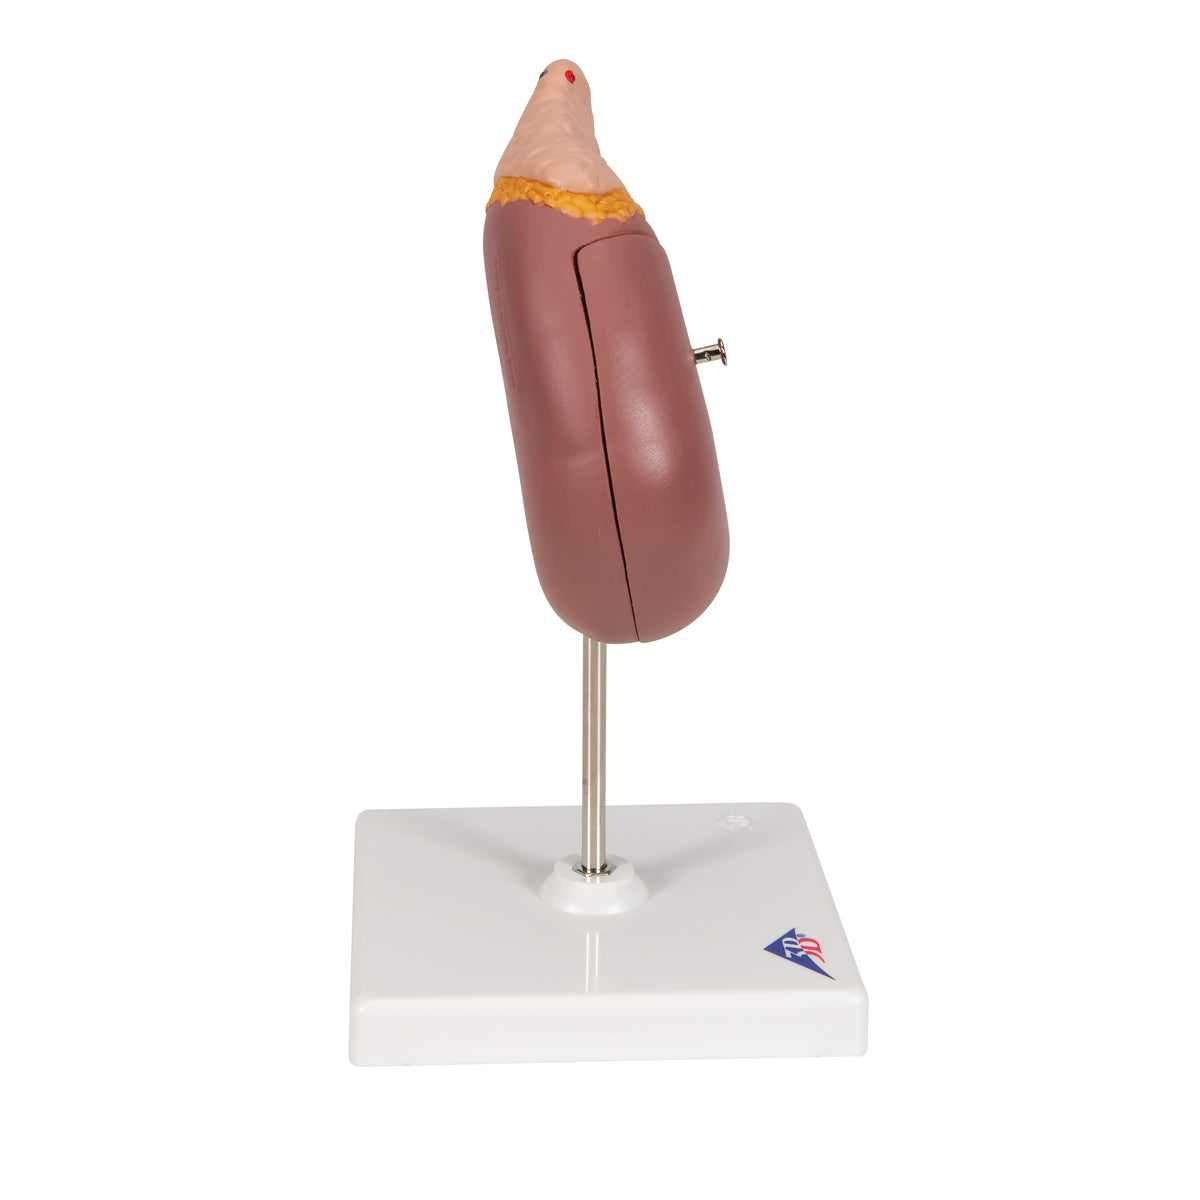 Classic kidney model incl. the adrenal gland where the kidney can be separated into 2 parts